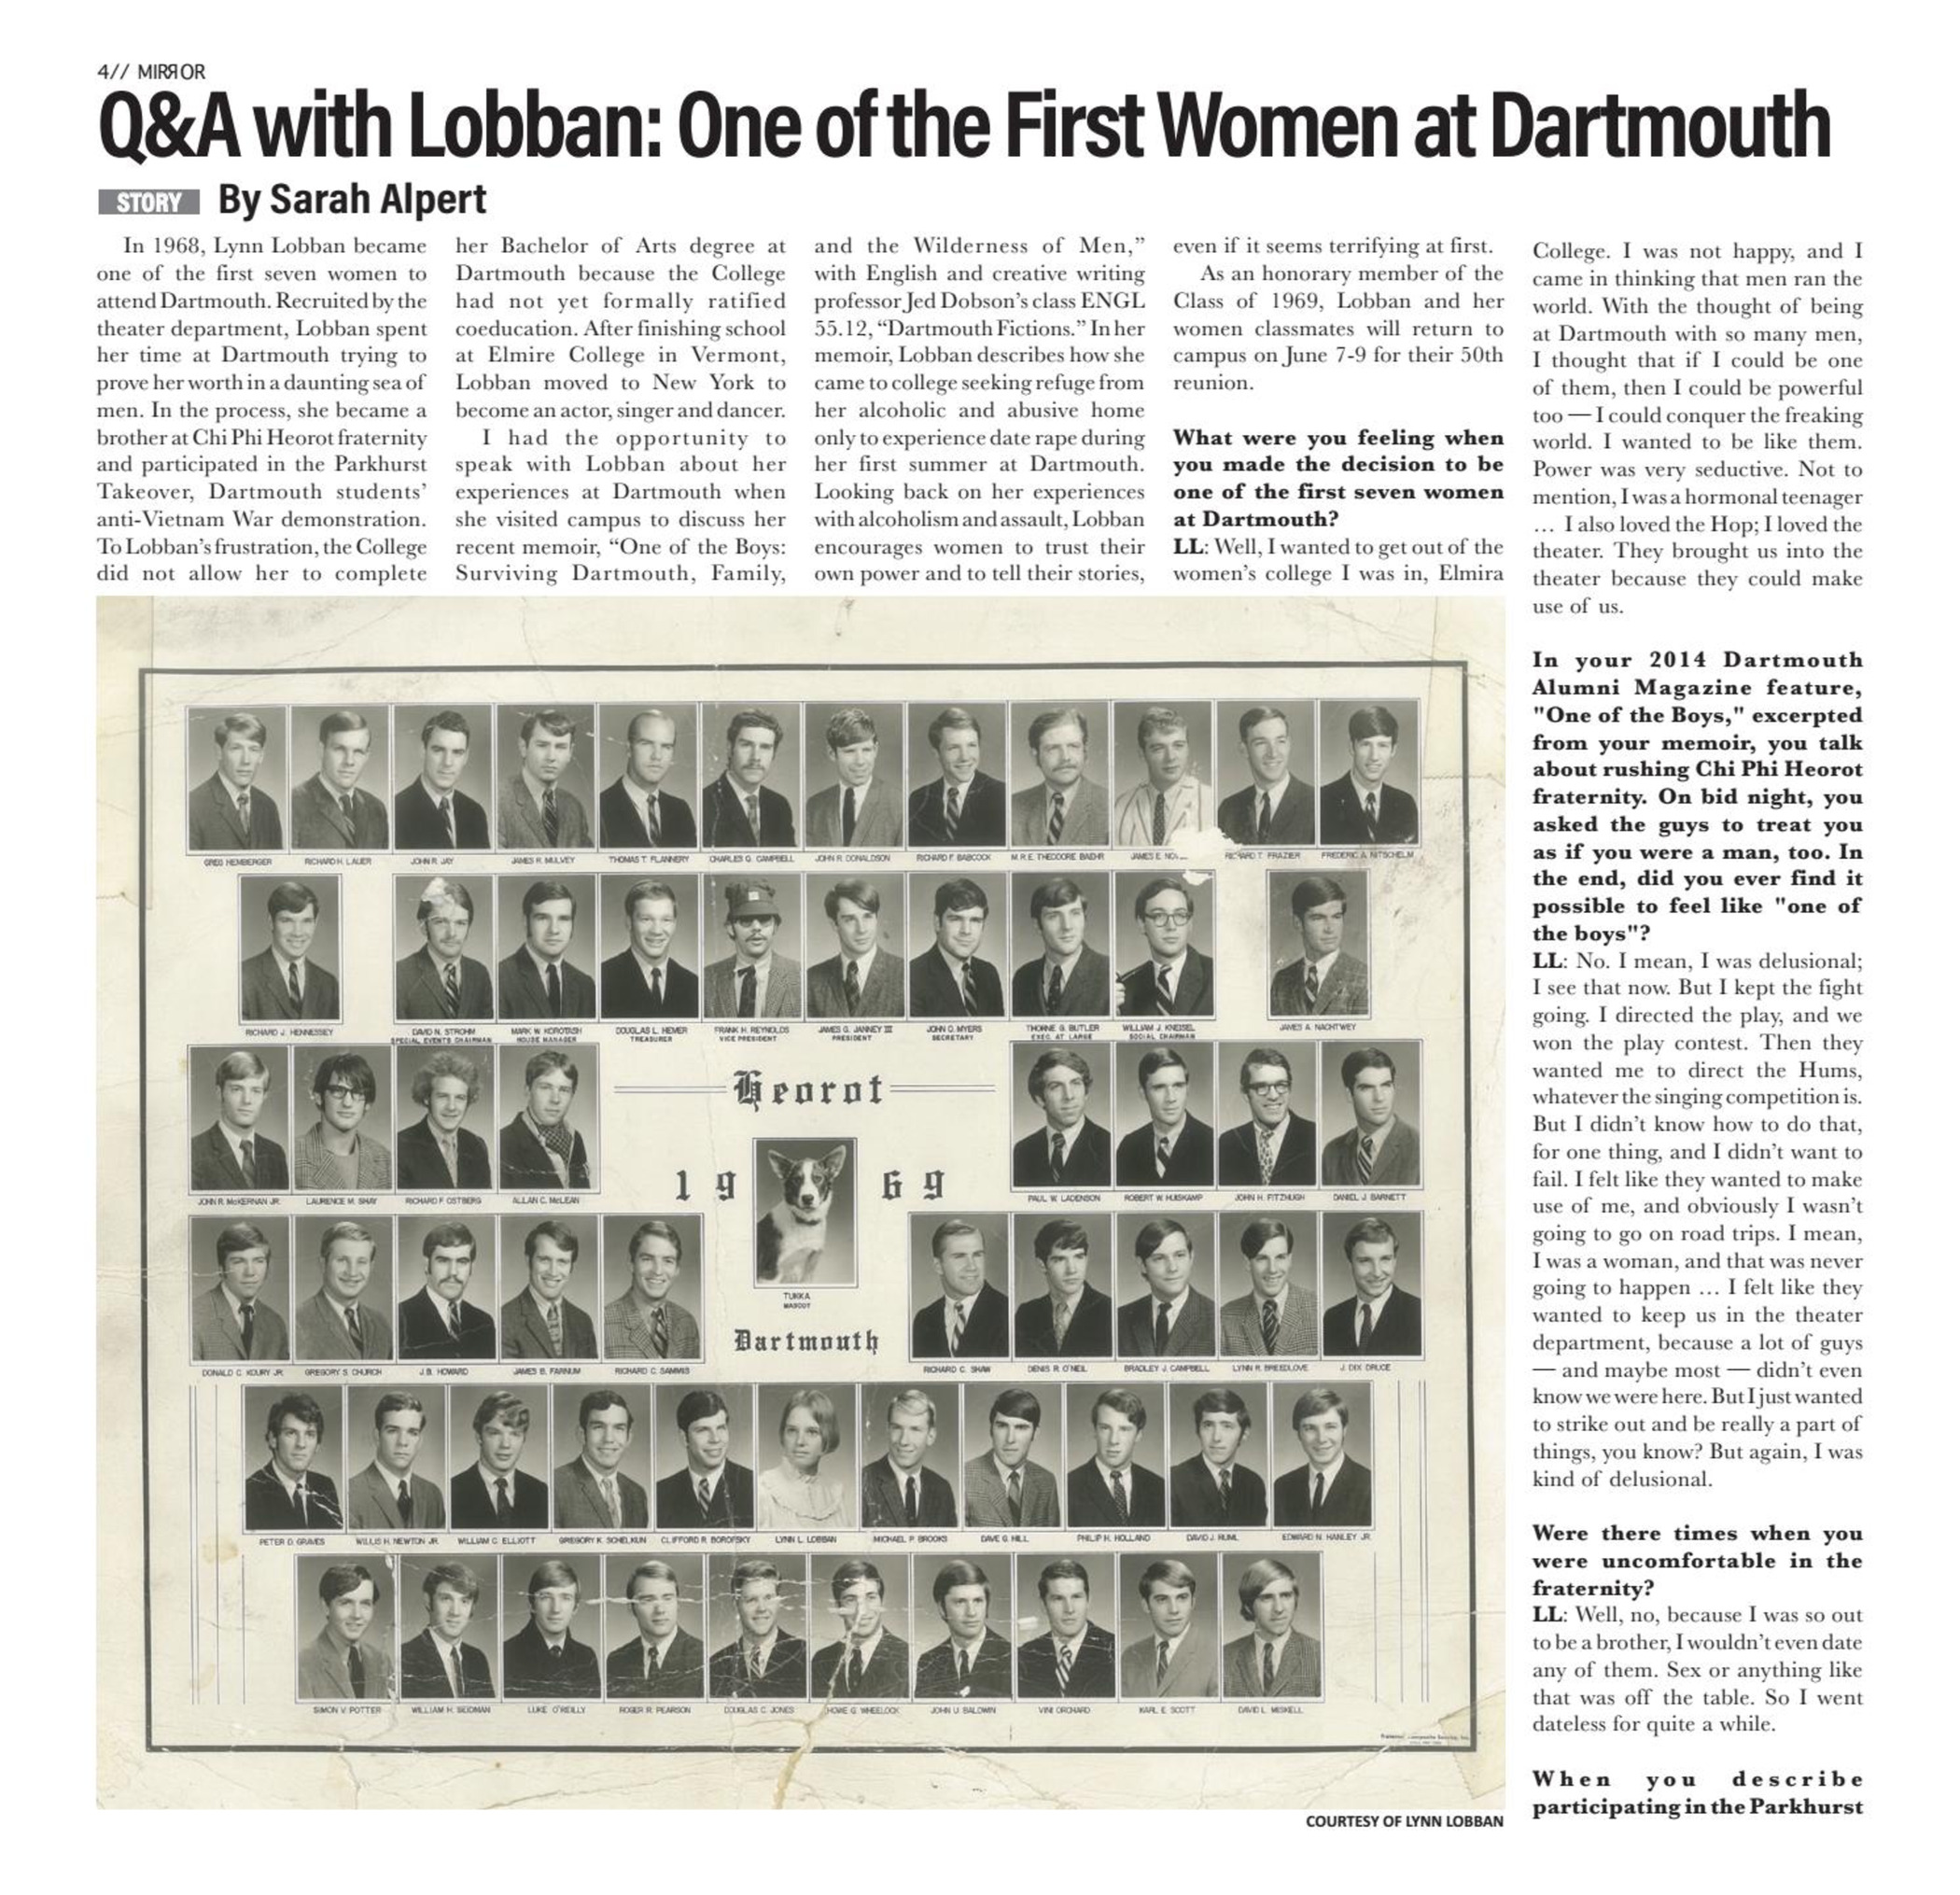 Q&amp;A with Lynn Lobban: One of the First Women at Dartmouth